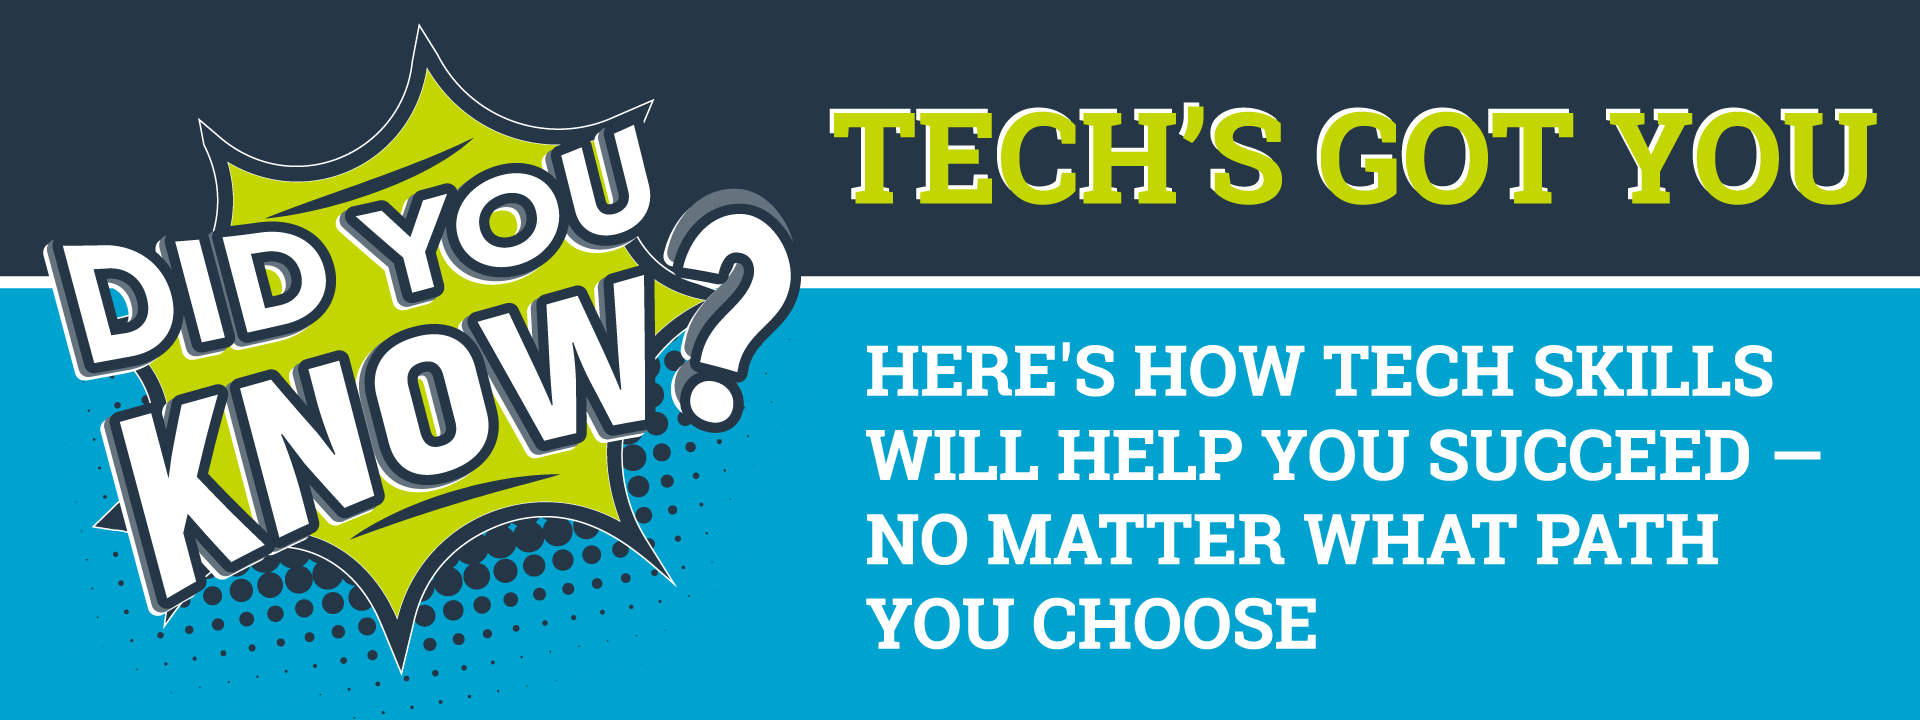 Did you know? Tech's got you!